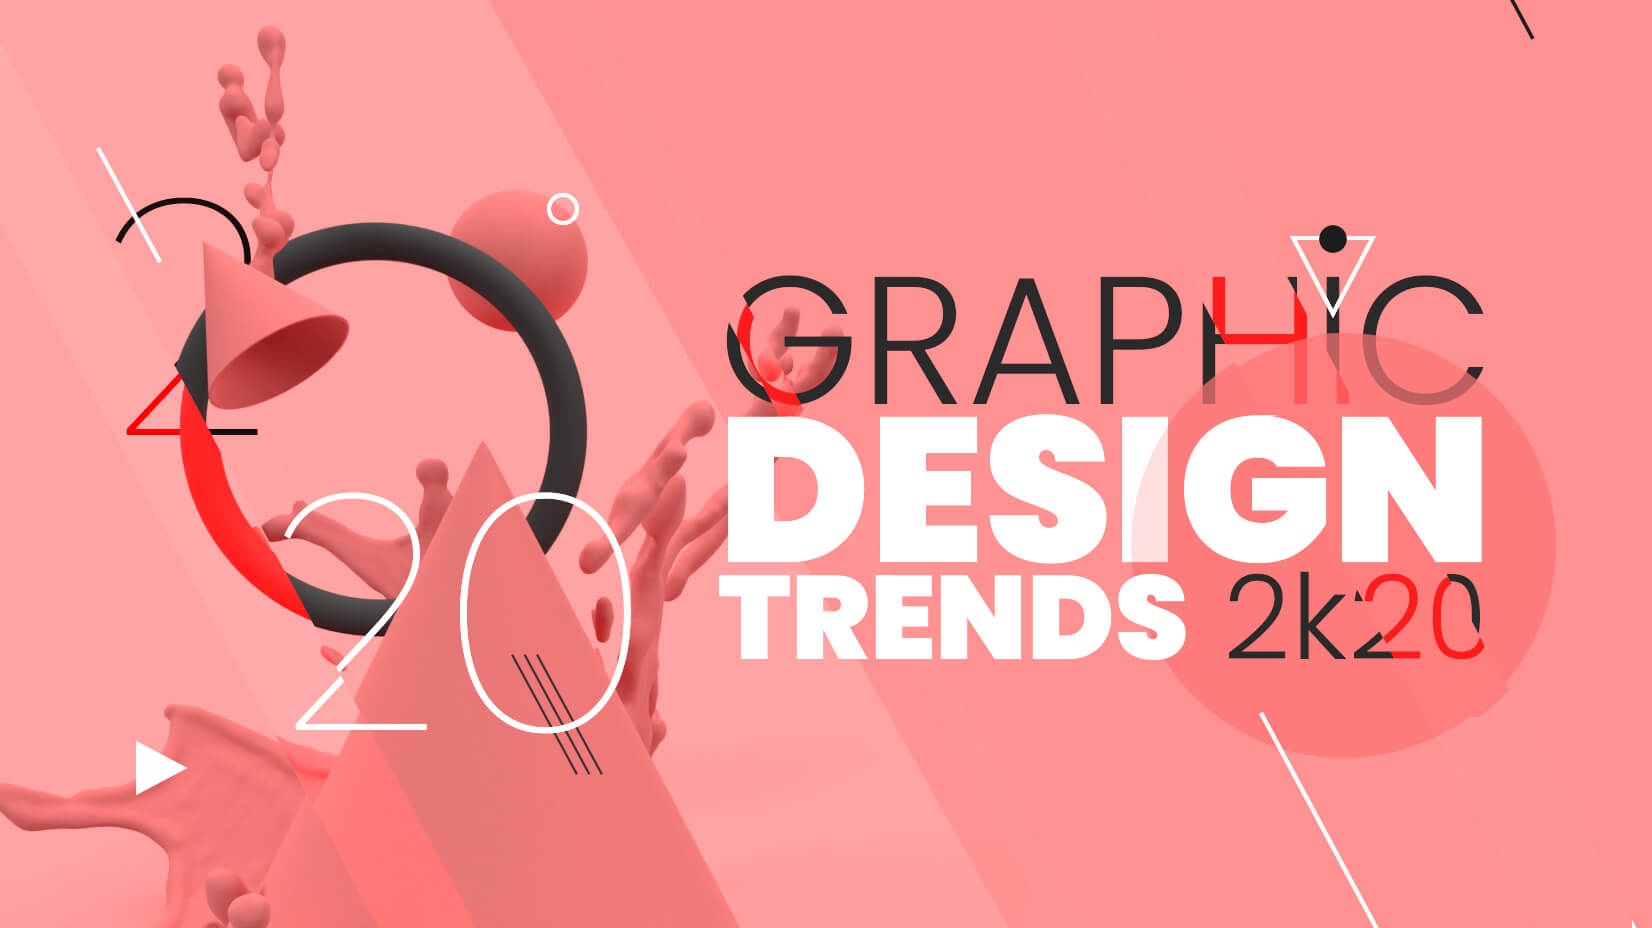 20 top graphic design trends for 2020